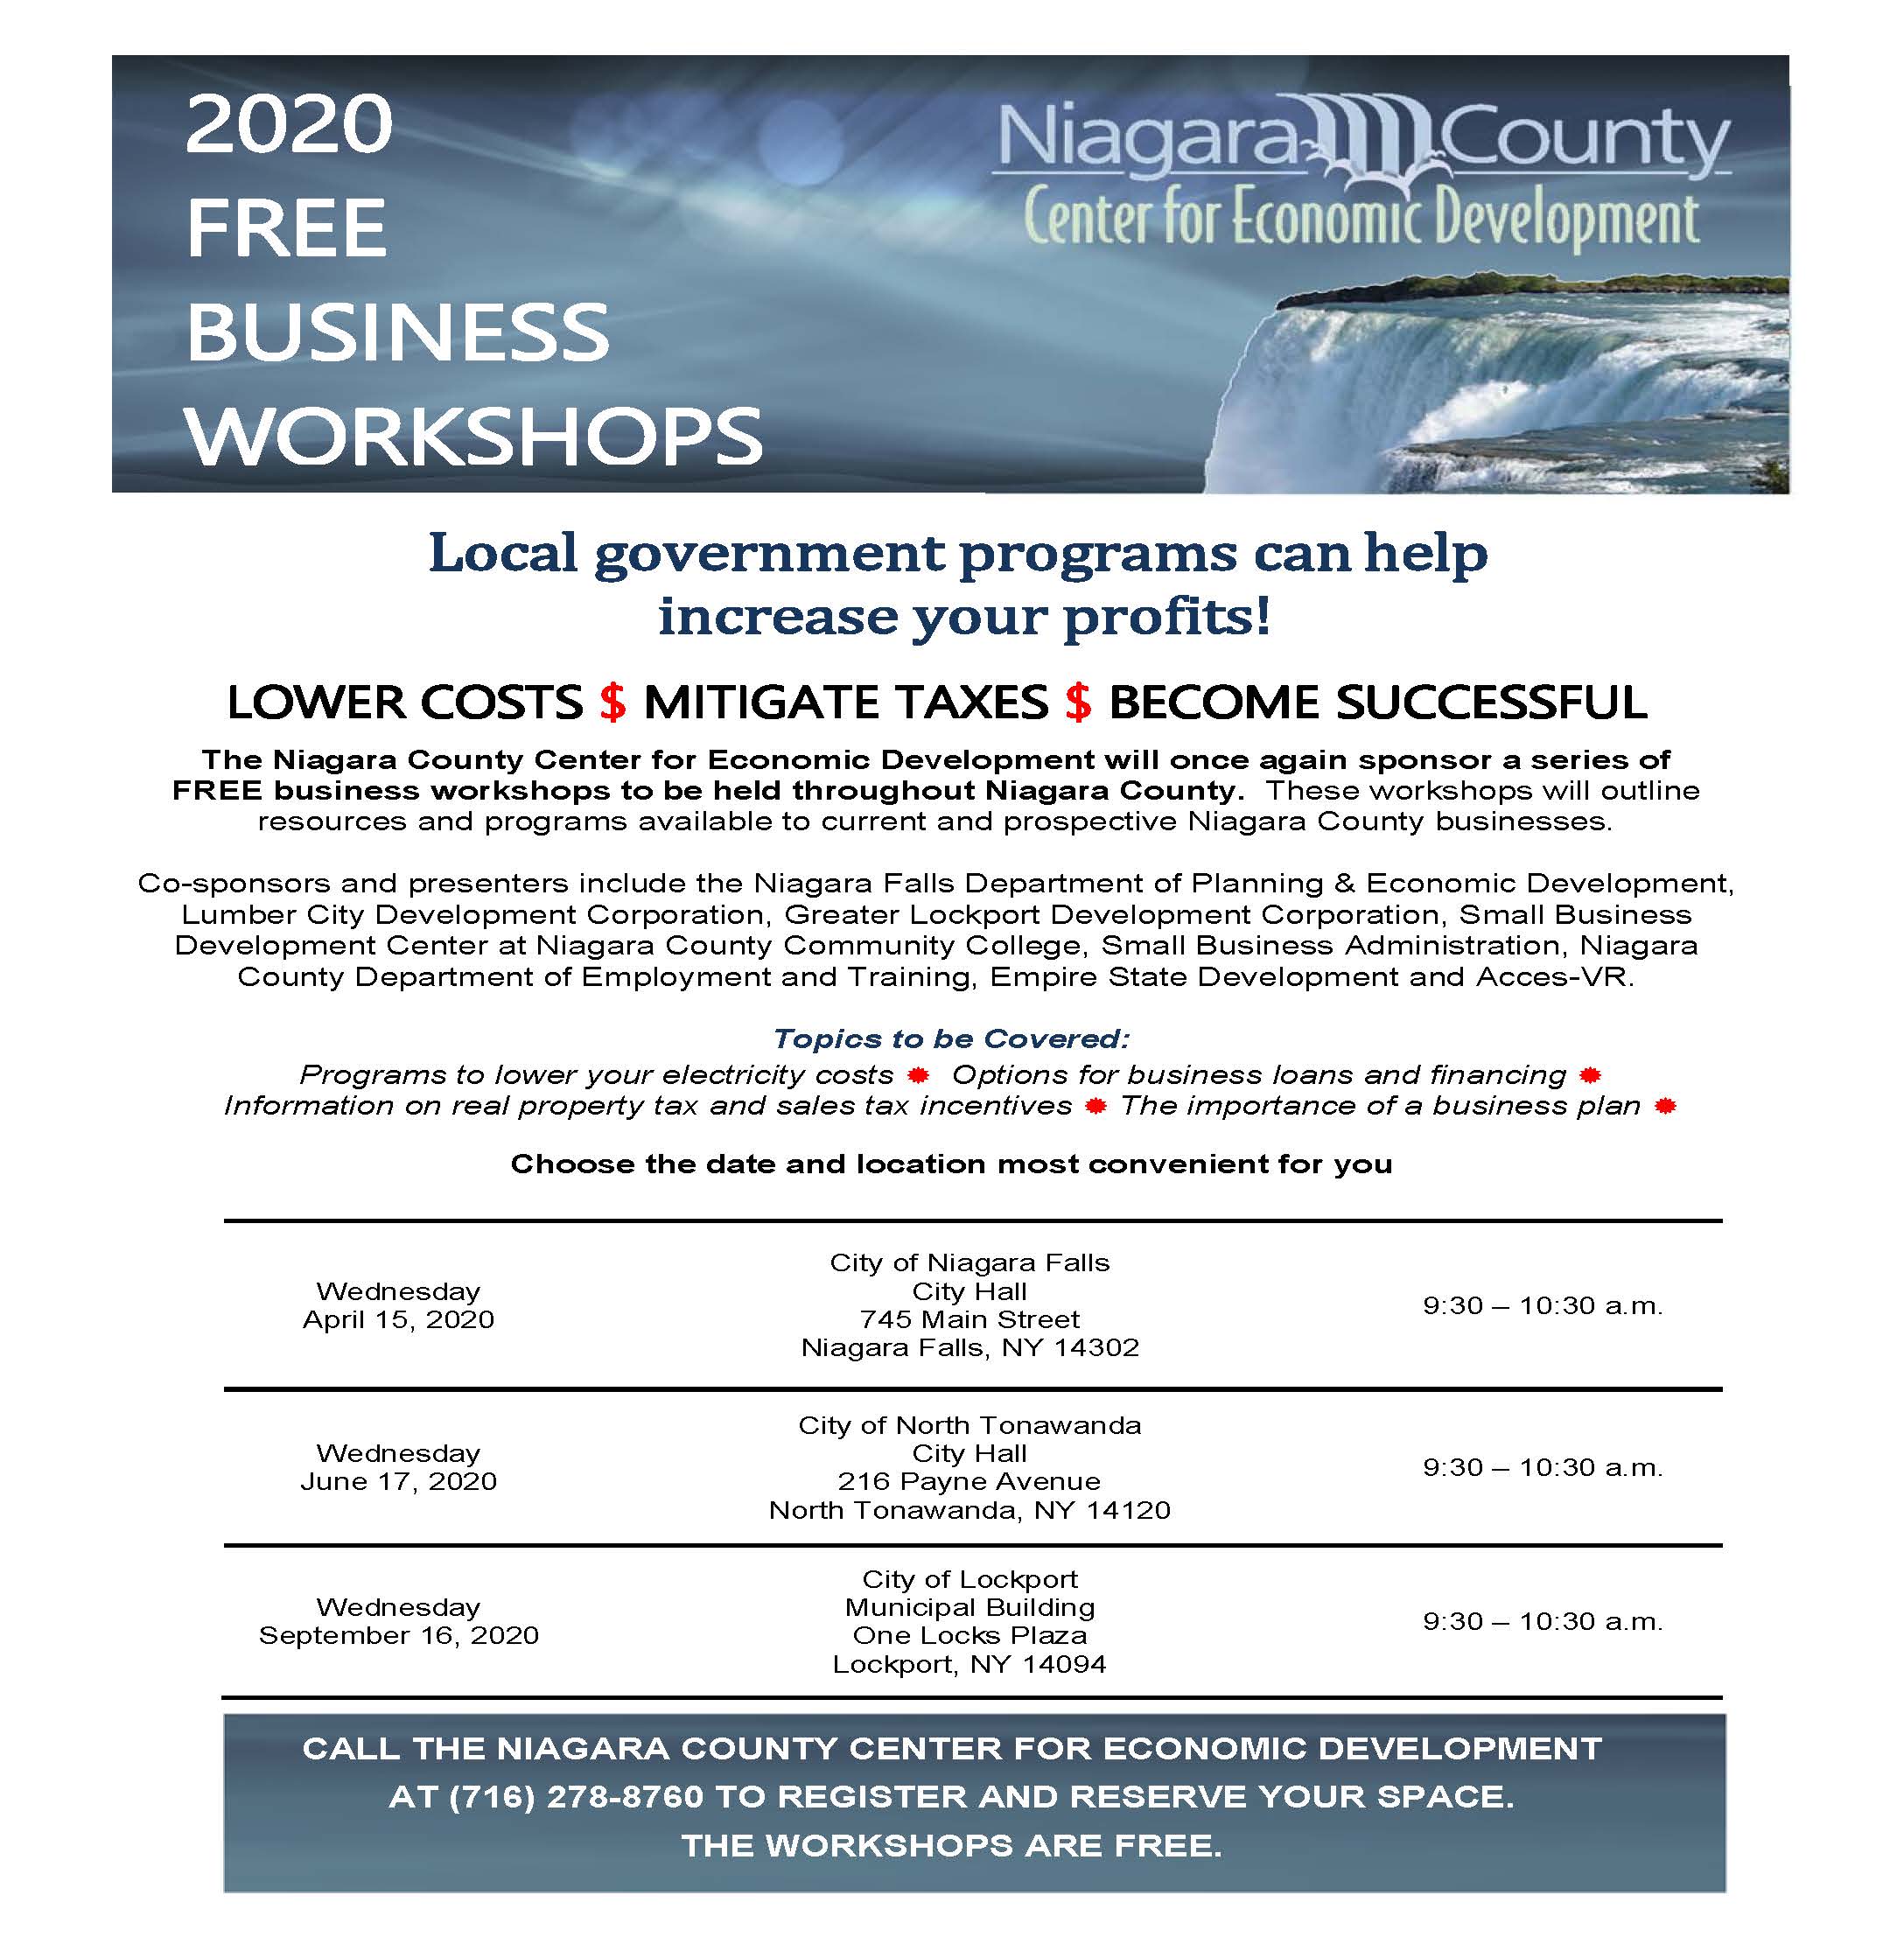 2020 Niagara County Free Business Workshops Series Announced